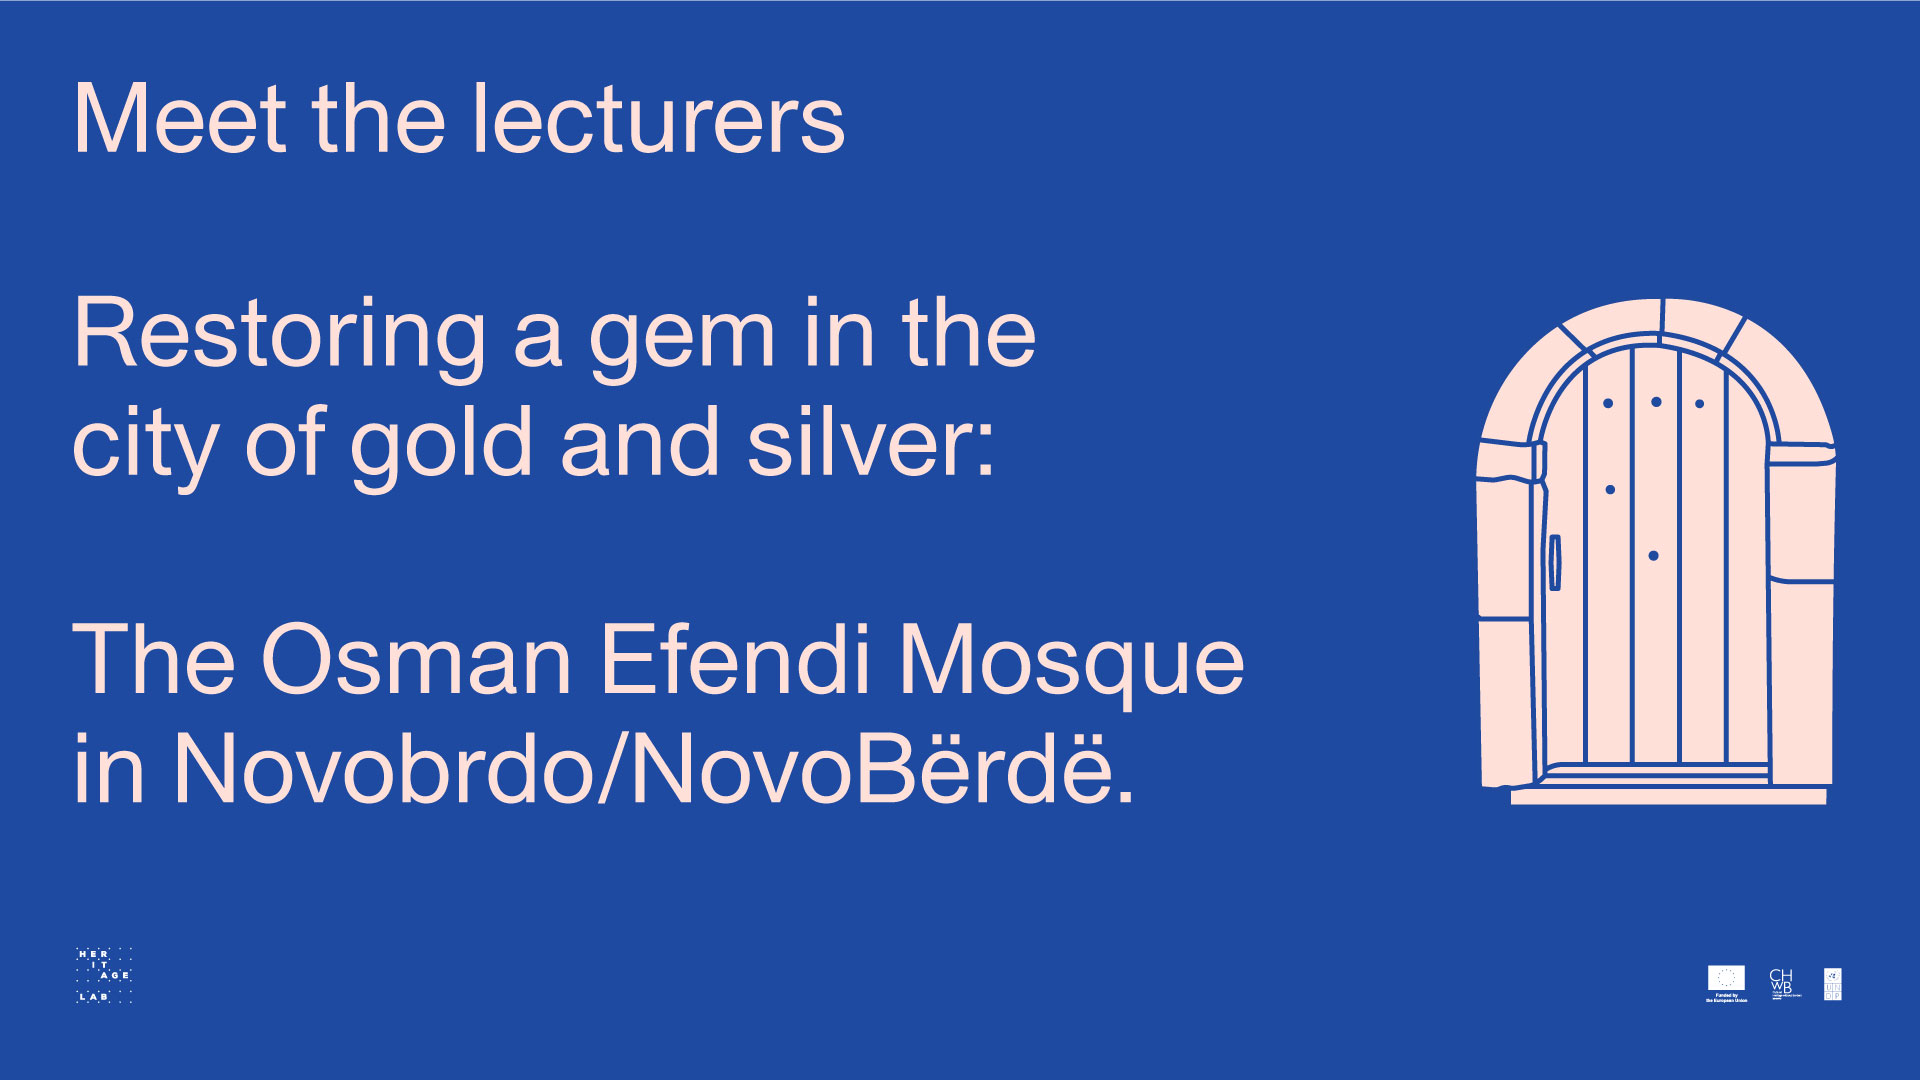 MEET THE LECTURERS: Restoring a gem in the city of gold & silver!